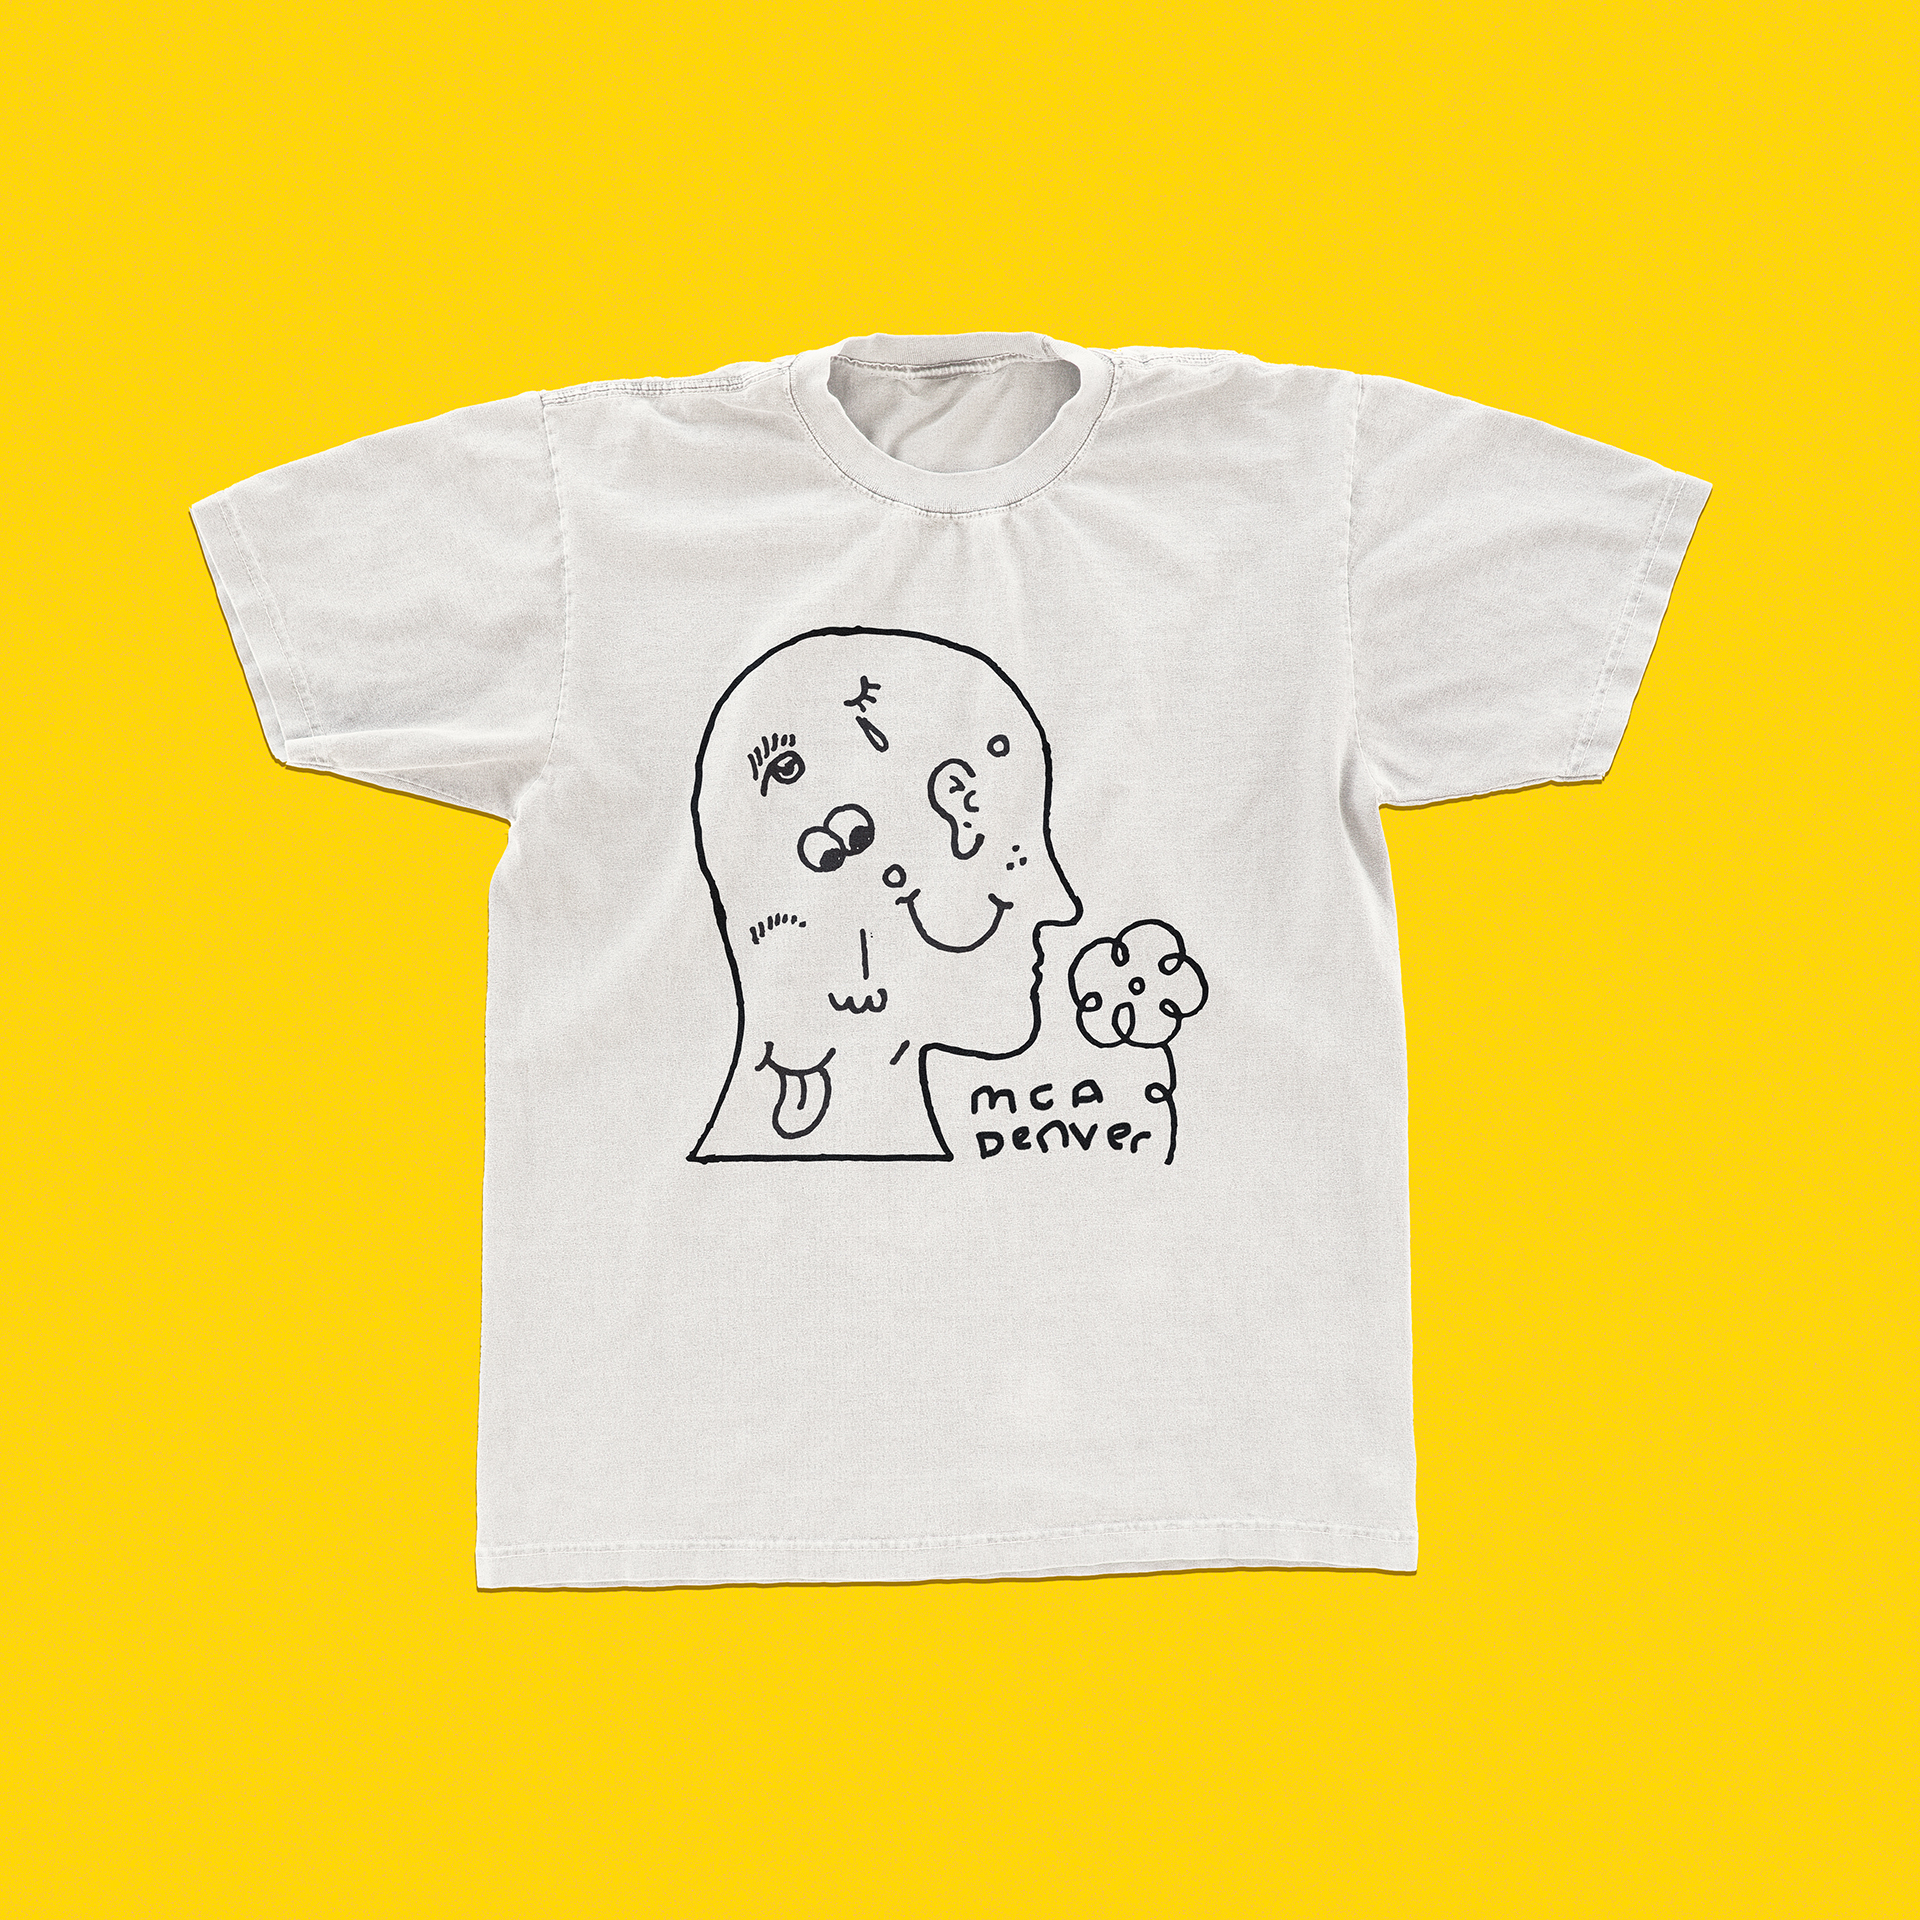 A white t-shirt on a yellow background with a black and white line drawing of the outline of a human profile. There is a small flower near the nose, which makes it look as though the figure on the shirt is smelling the flower. There is text between the flower and the head that reads “MCA Denver”. Inside the head are eyes, an ear, a smiley face, a mouth with a tongue sticking out, and a few other facial features.